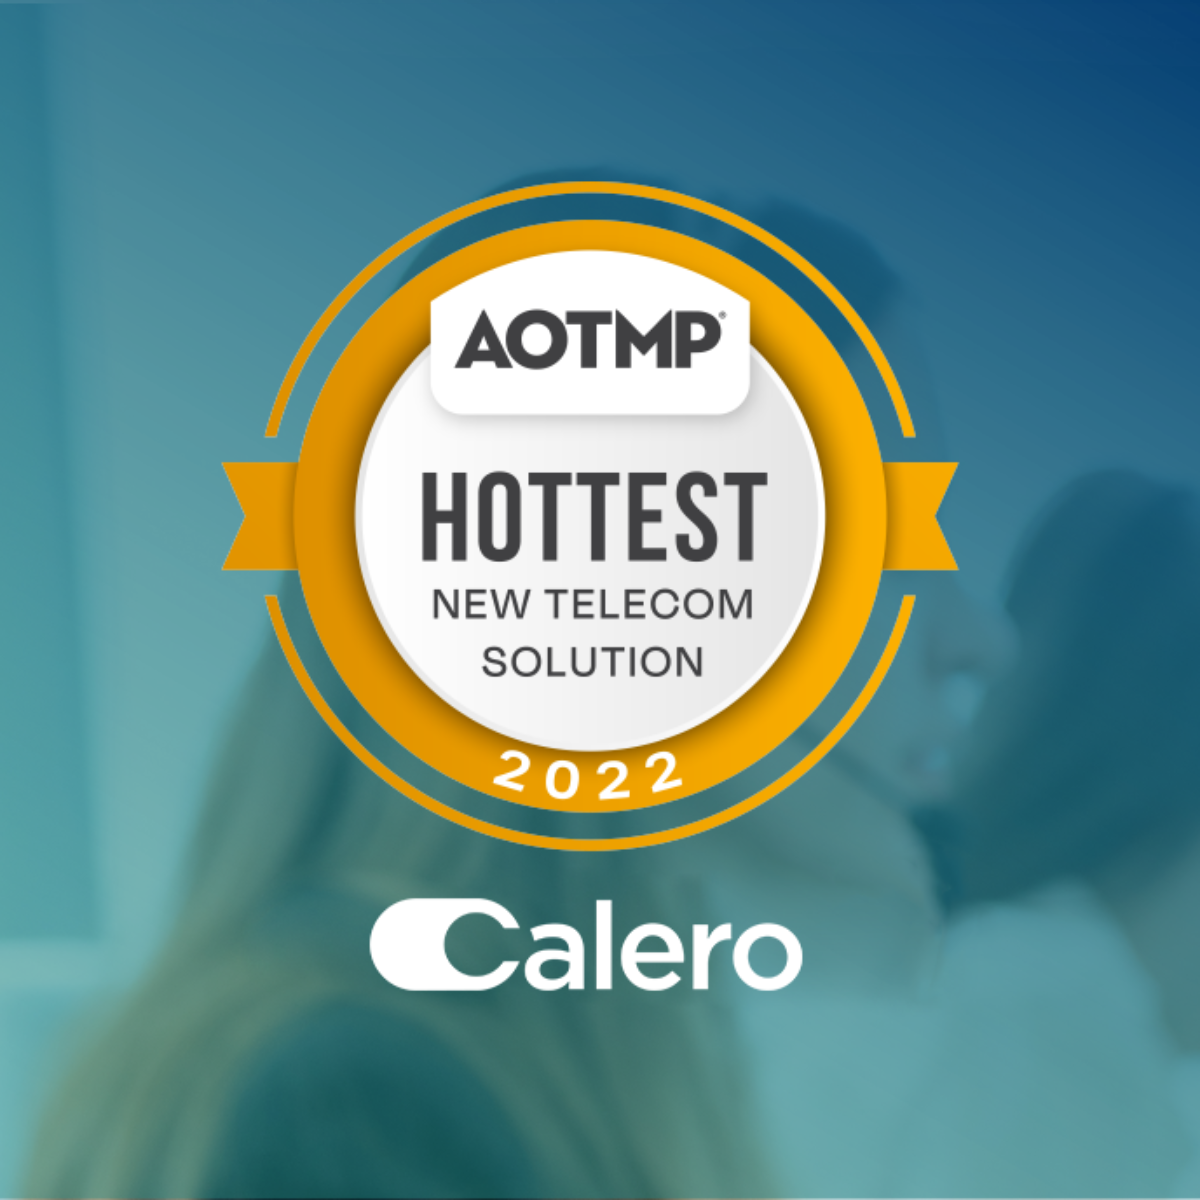 Calero Named Hottest Telecom Solution by AOTMP